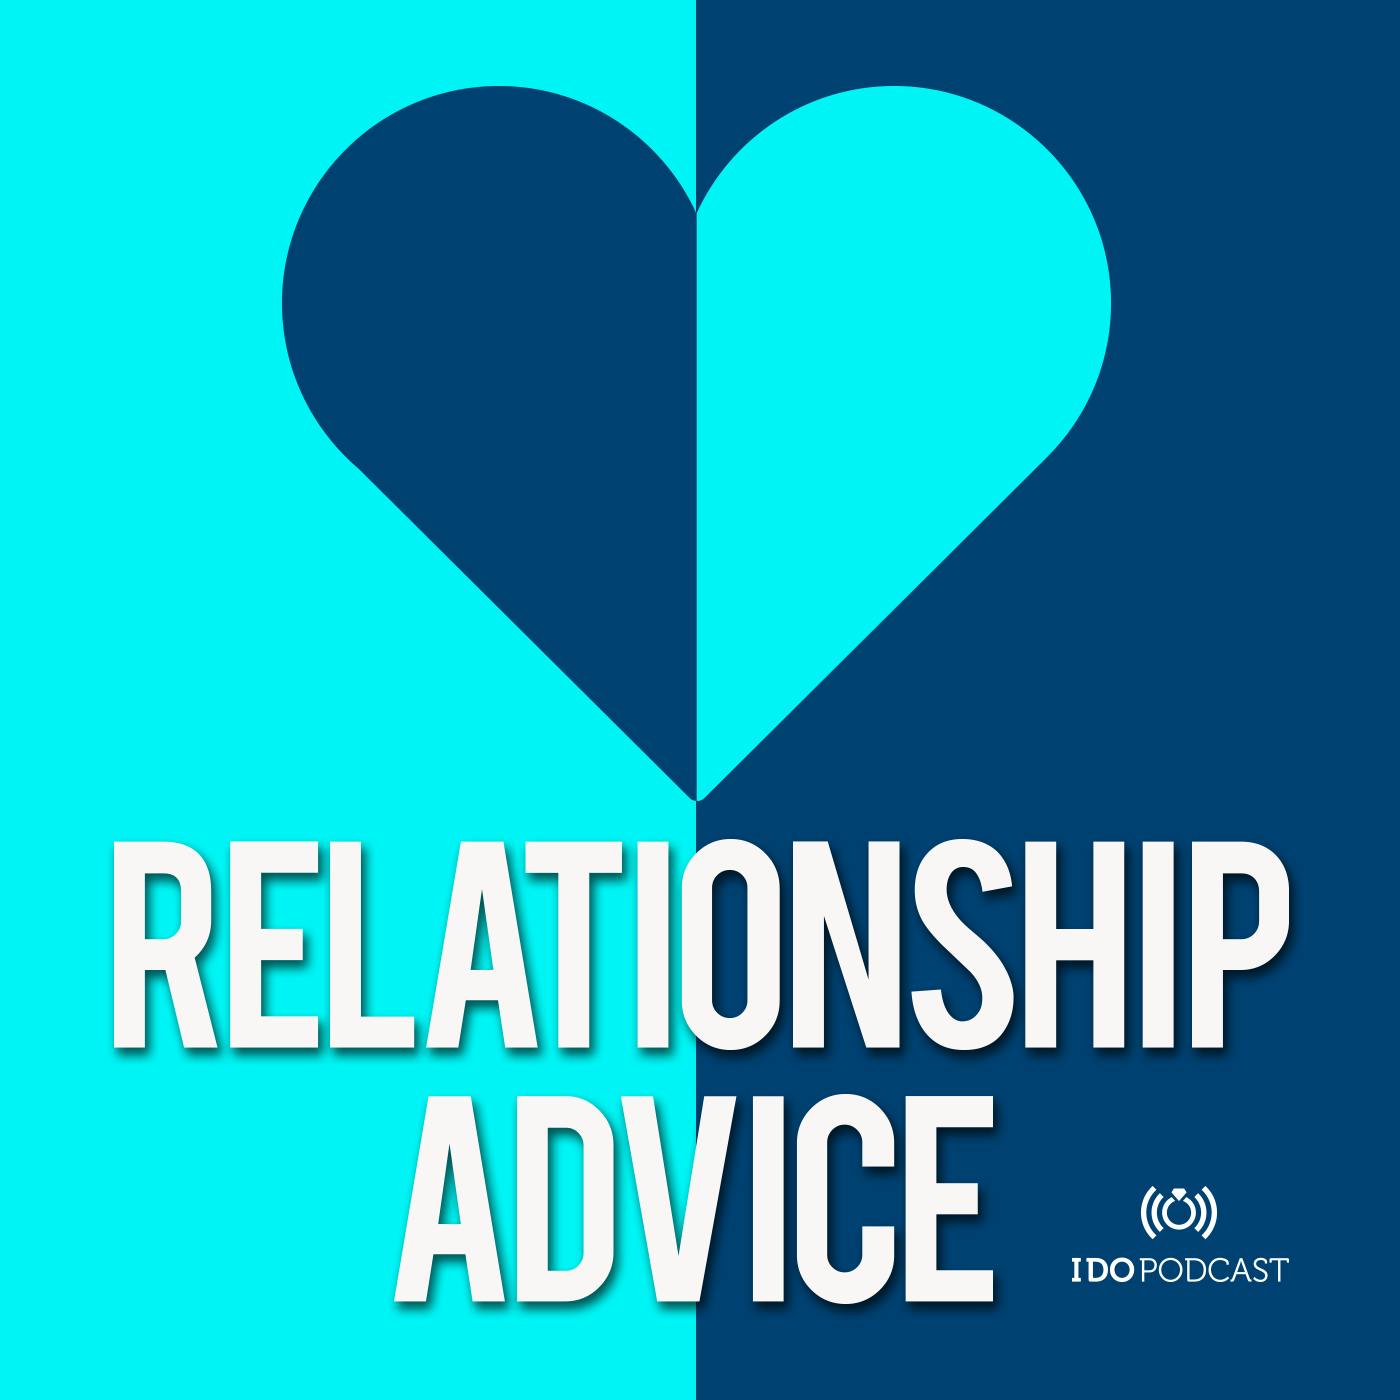 180: Caring For Ageing Parents And The Affects On Your Relationship